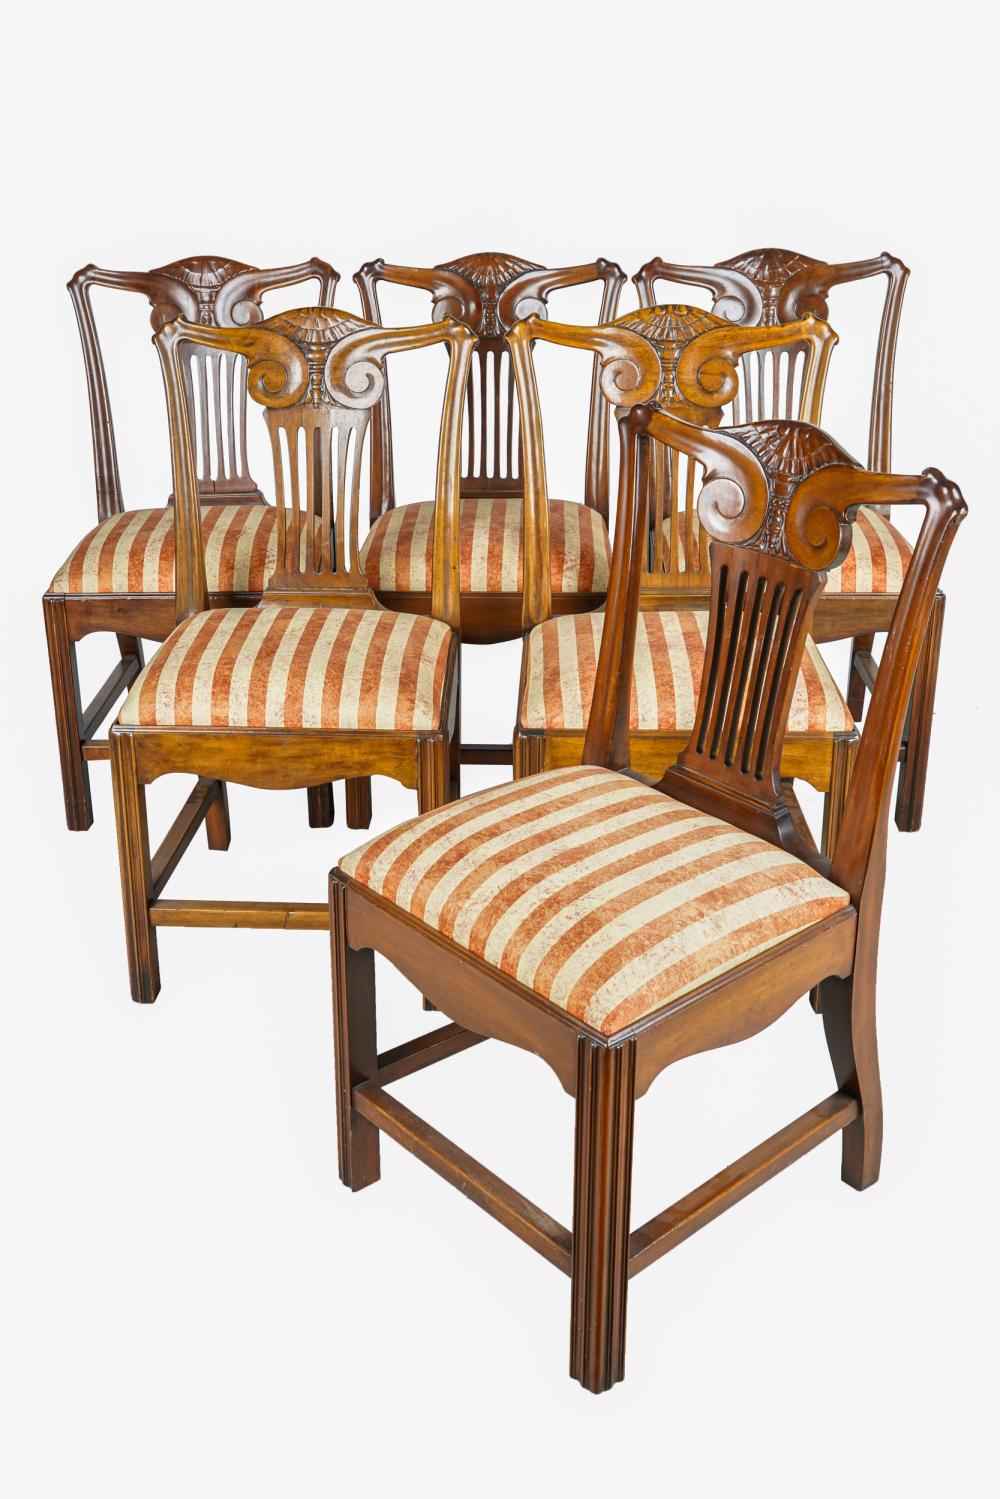 SIX CARVED MAHOGANY DINING CHAIRSeach 3377a8